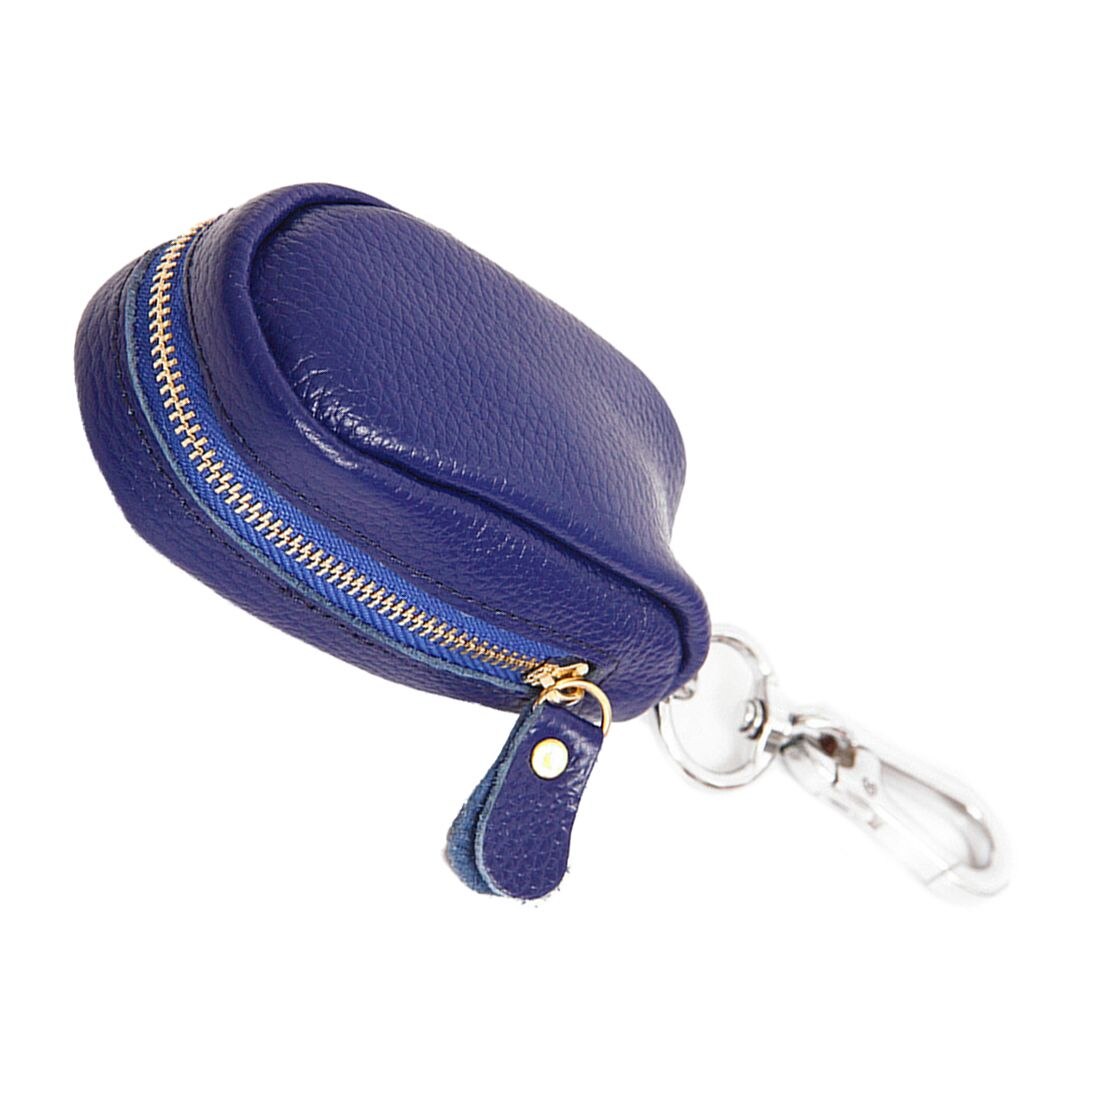 Car Key Bag Household key bag Unisex Zipper bag in PU Leather for Keychain Case for Key / USB / Pieces / Coin - ebowsos